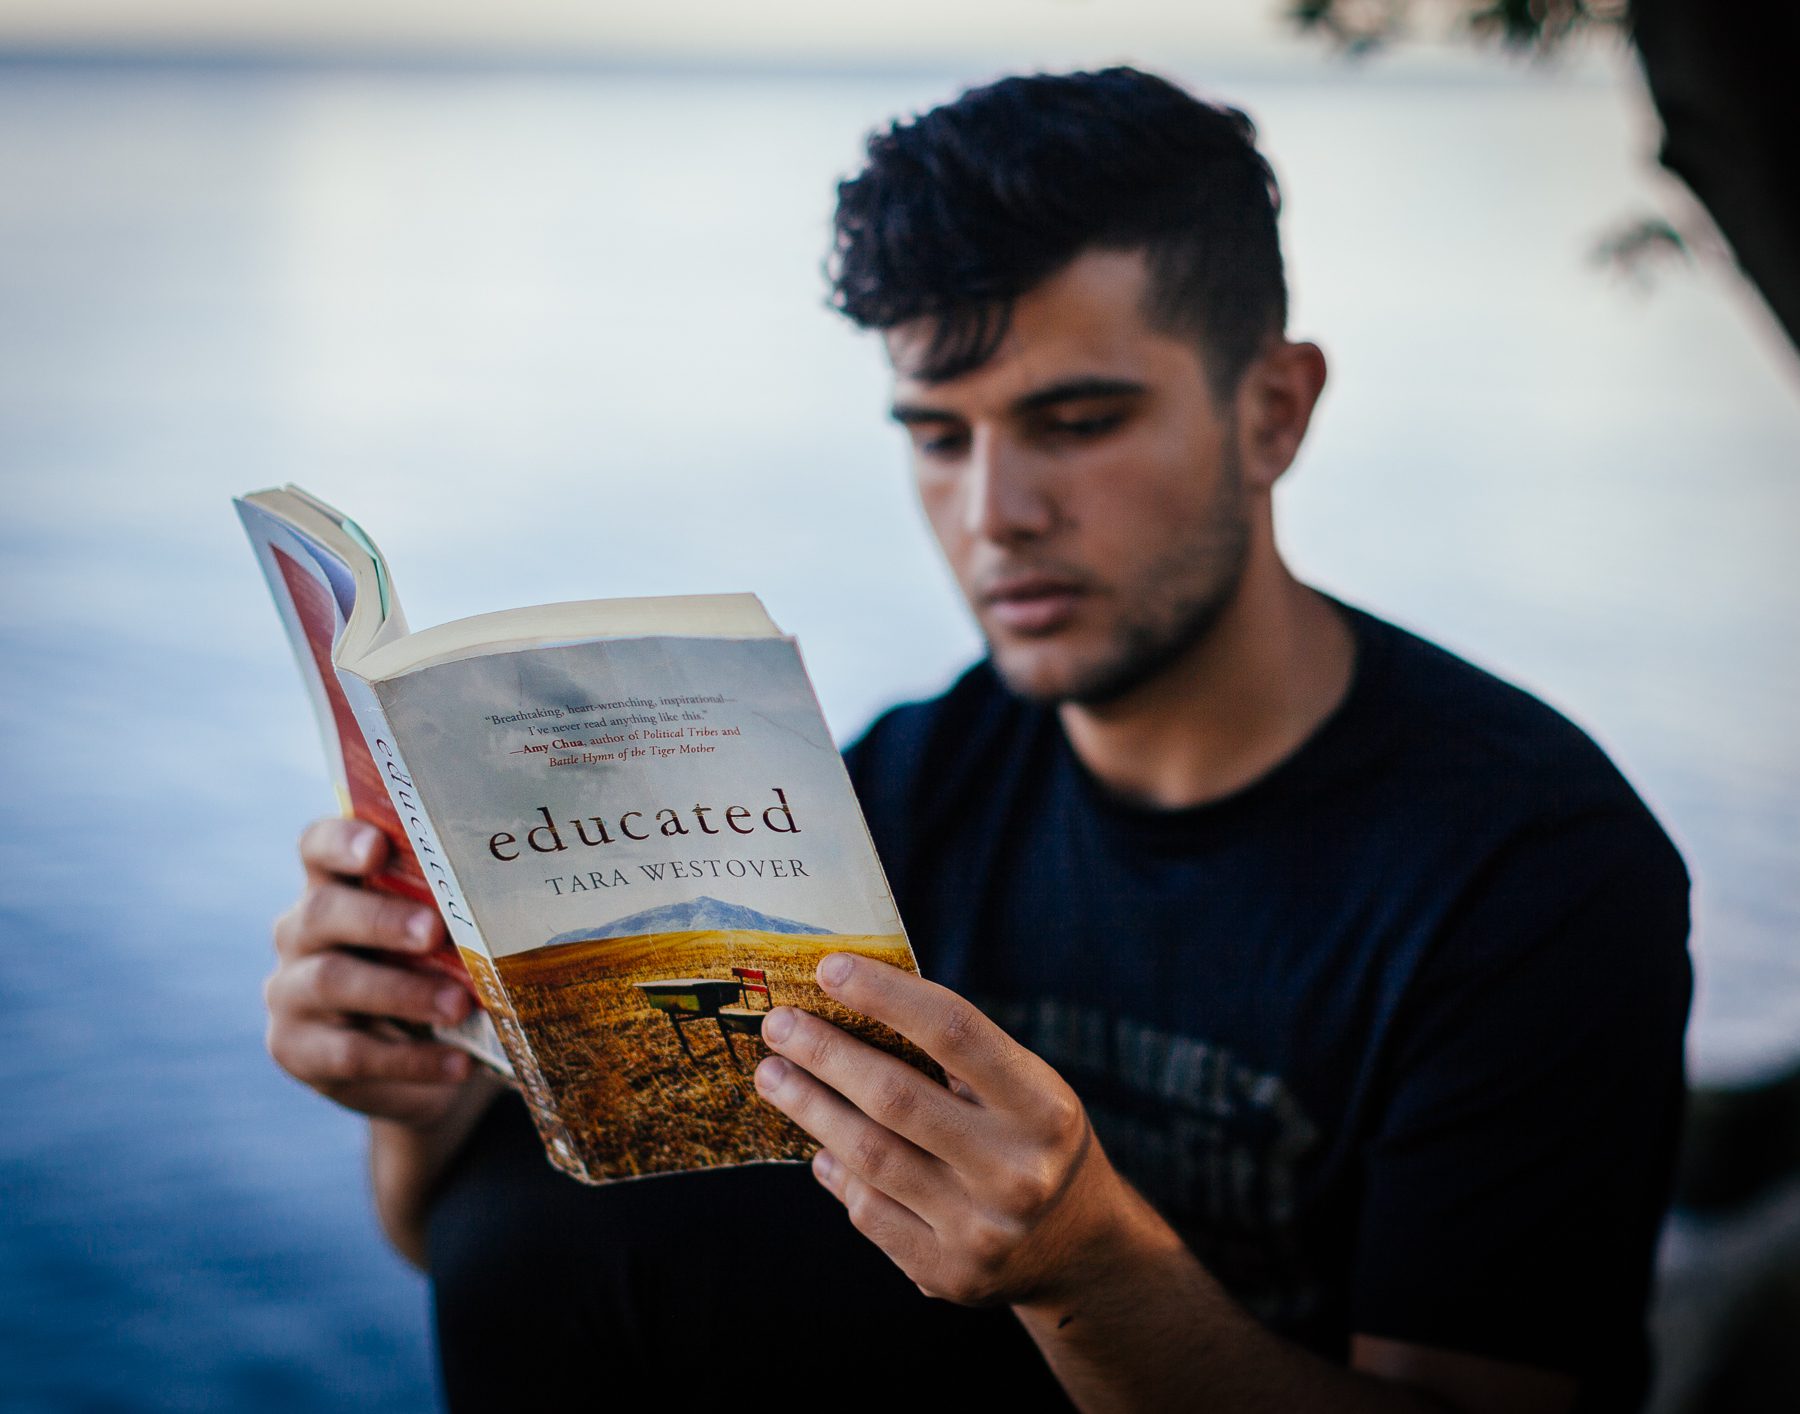 The memoir Educated by Tara Westover is Mohamad's favourite book. In it, Westover recounts overcoming her isolated Mormon upbringing in Idaho's mountains, starting college at 17 (her first formal education), and eventually completing a PhD in history at Cambridge University. "It motivates me because I feel like I can relate. I missed school until I was 15. I came here, started high school, and now I'm hoping to go to university. If she can do it, I can do it too." 